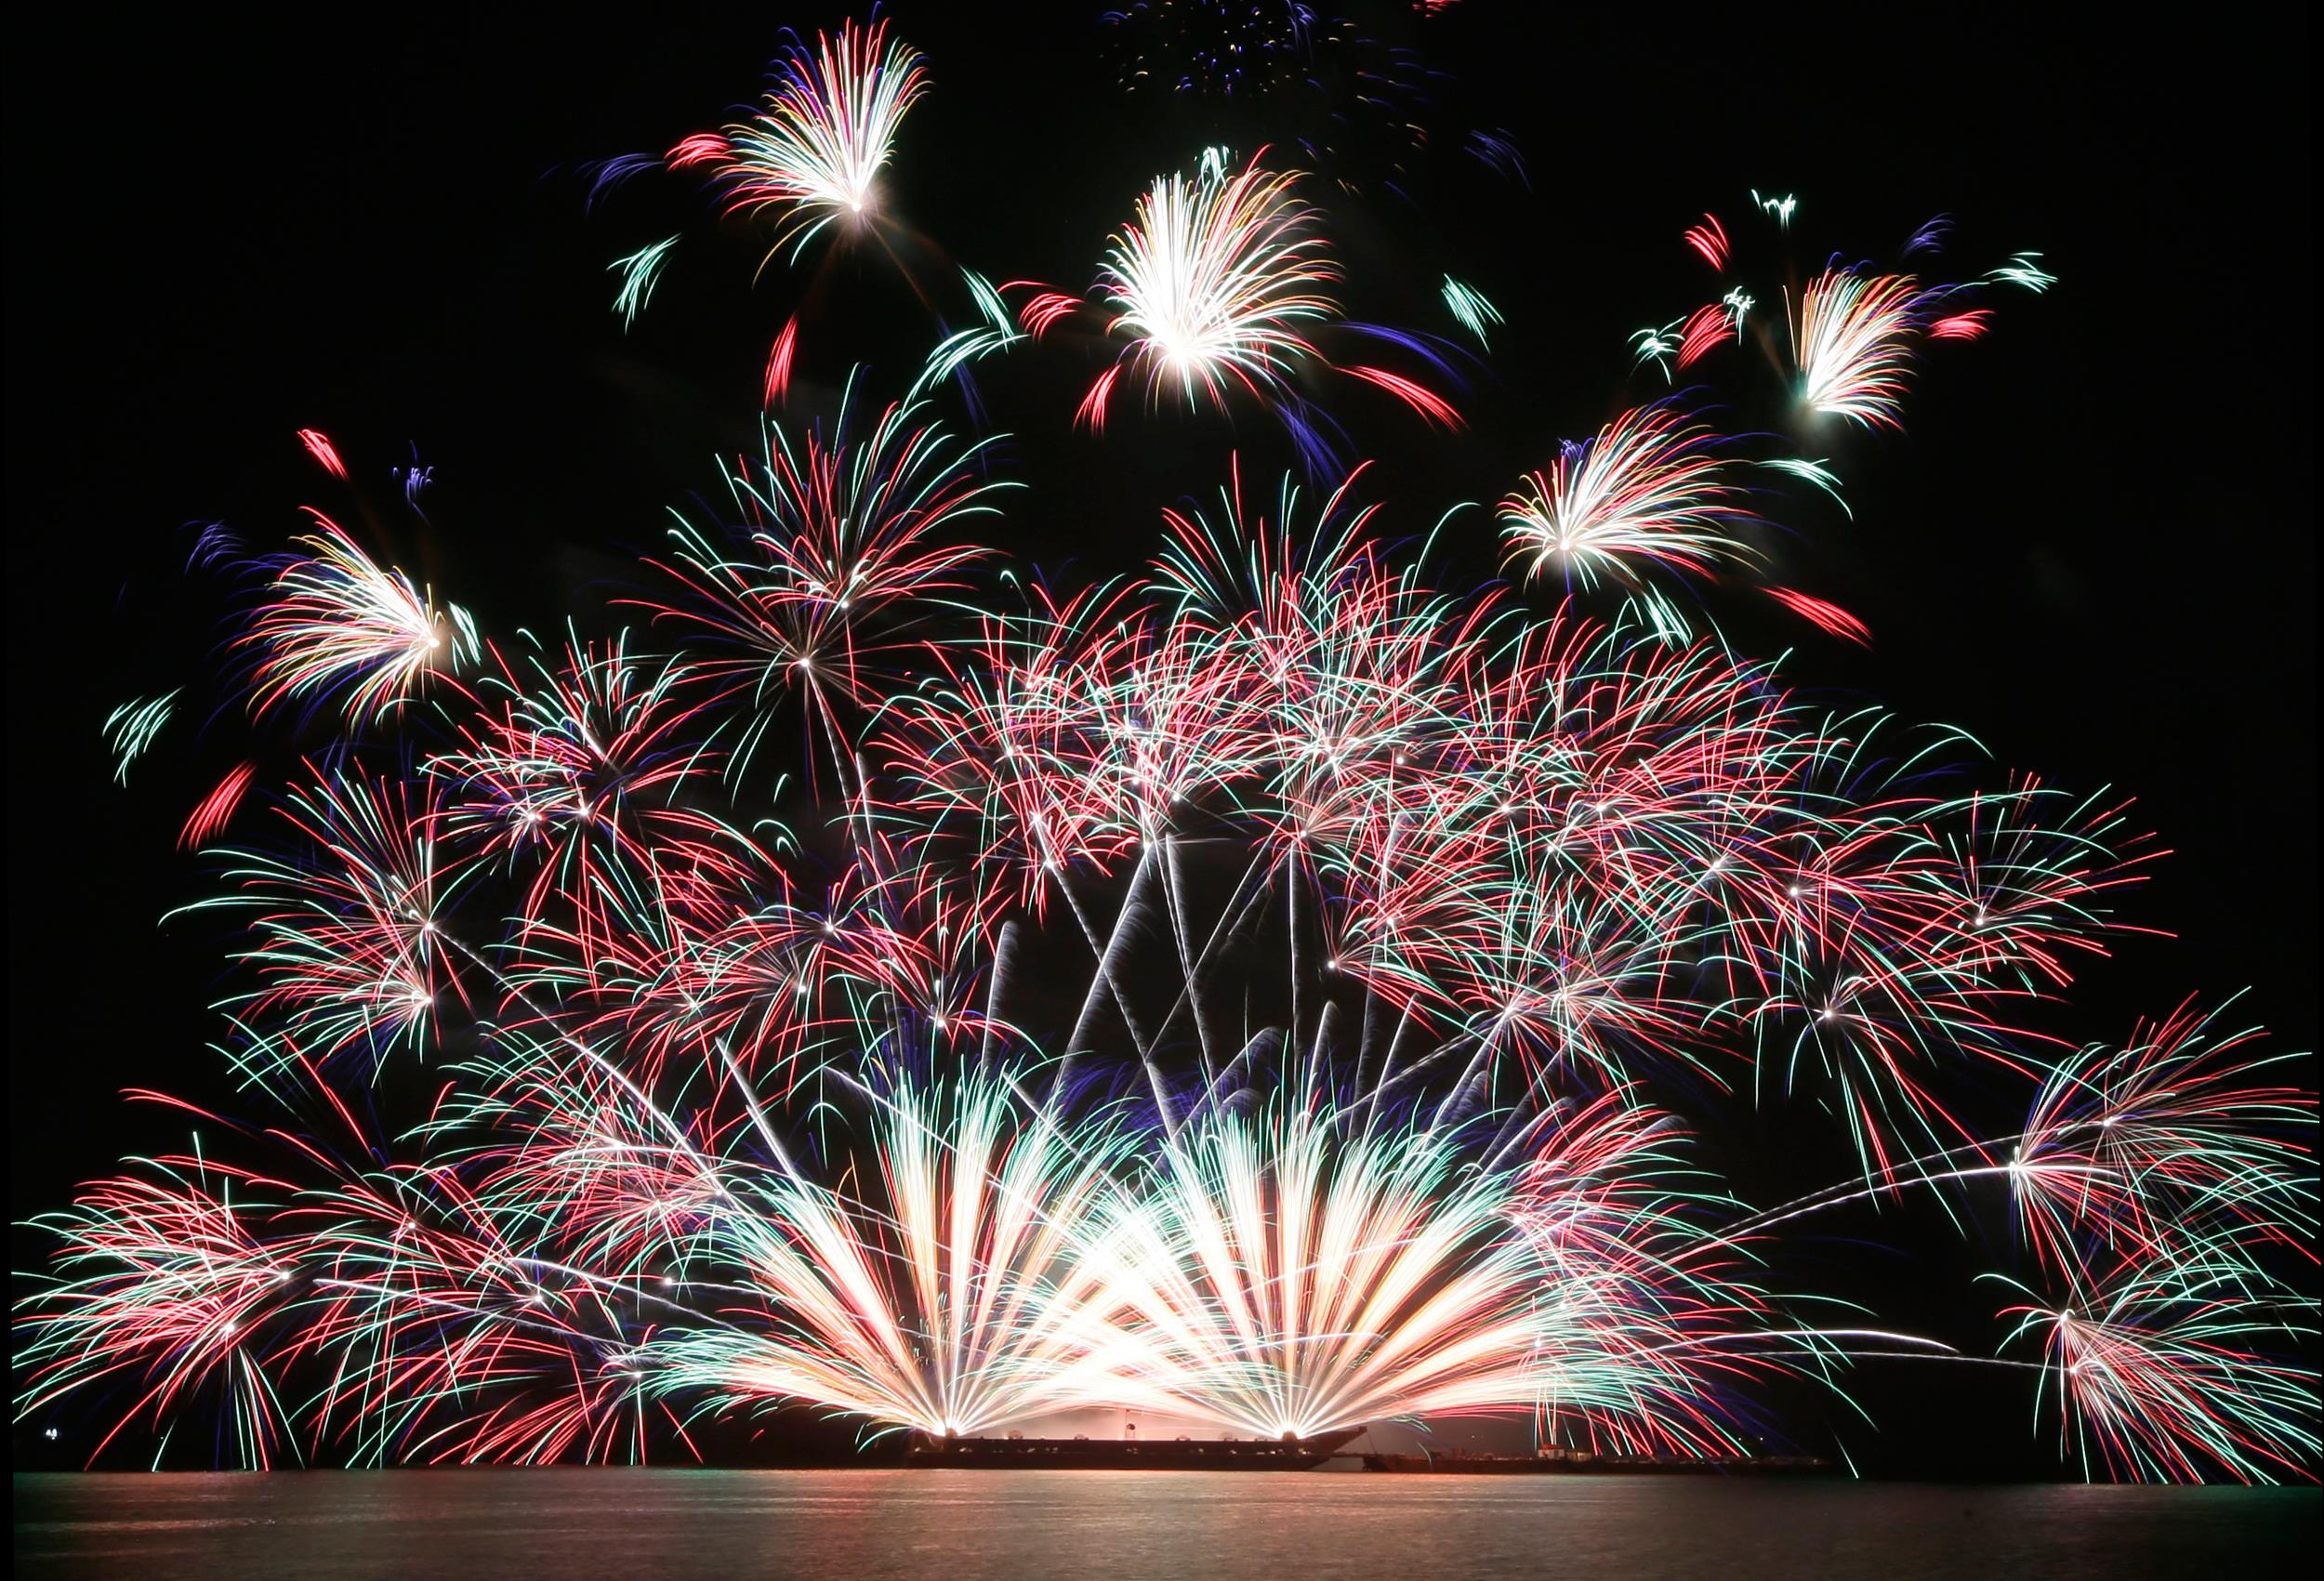 Global Fireworks Competition Lights Up Night Sky